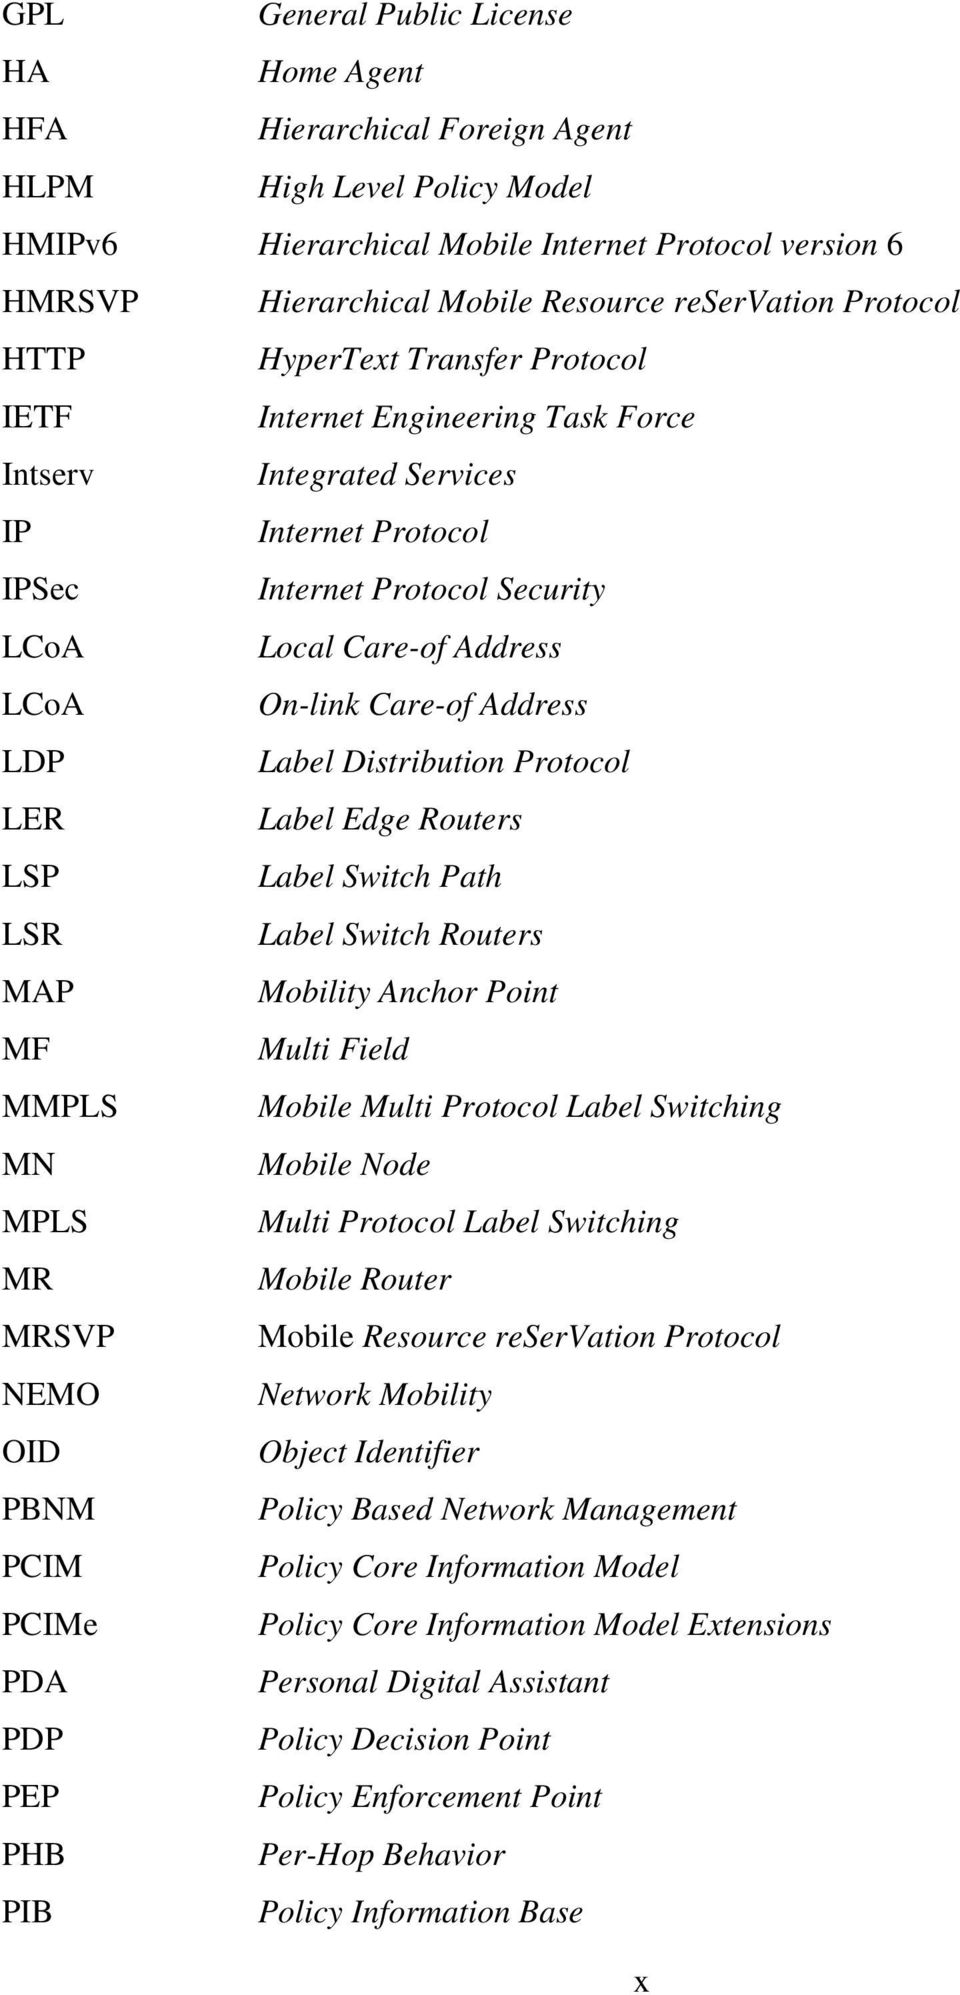 LCoA On-link Care-of Address LDP Label Distribution Protocol LER Label Edge Routers LSP Label Switch Path LSR Label Switch Routers MAP Mobility Anchor Point MF Multi Field MMPLS Mobile Multi Protocol